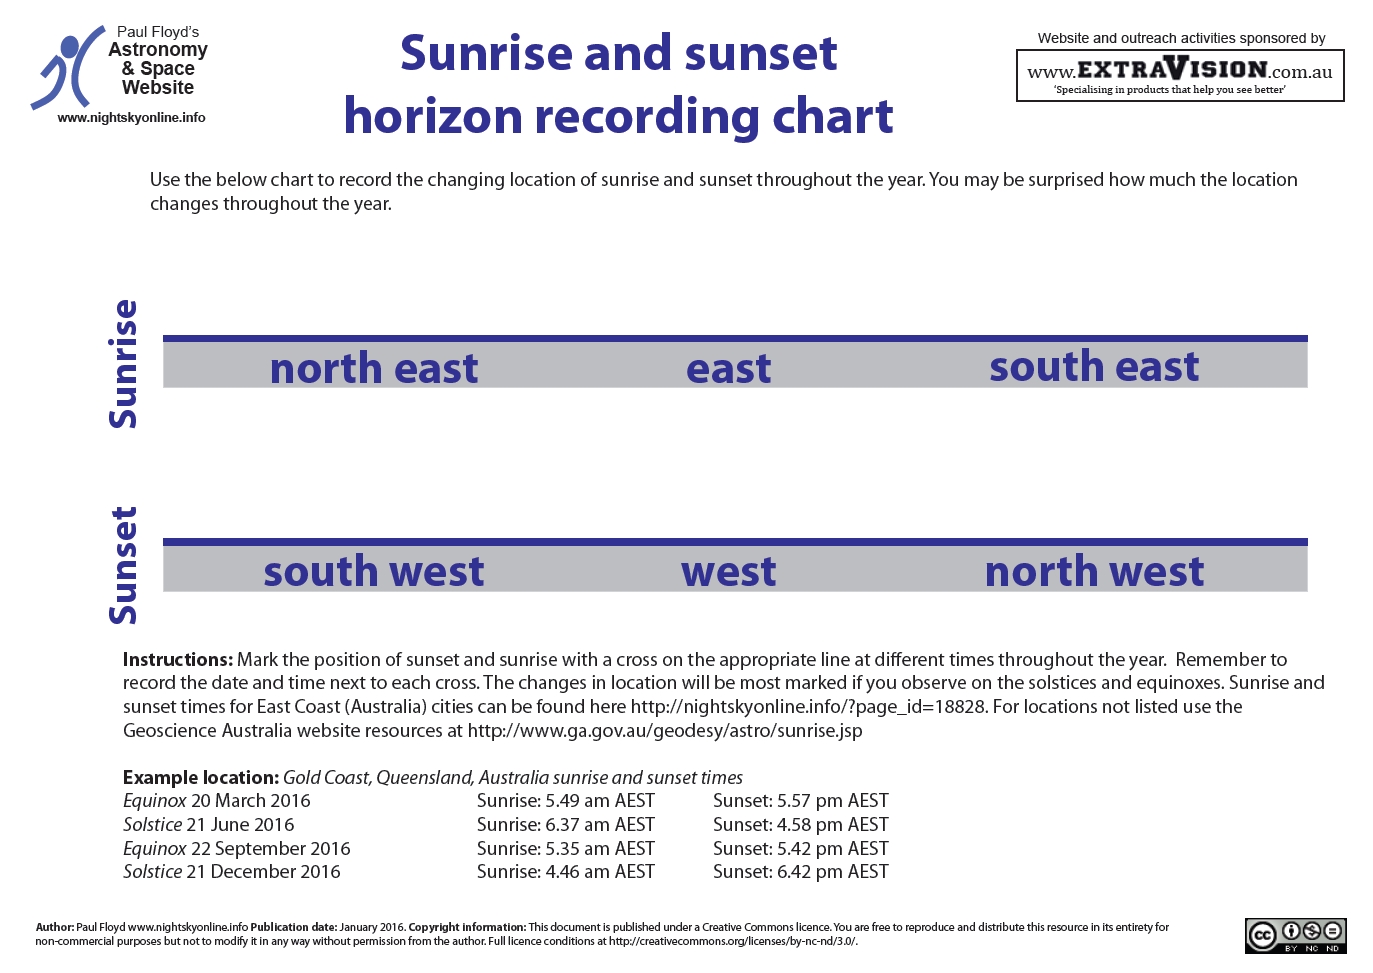 Why do the sunrise and sunset times change throughout the year?